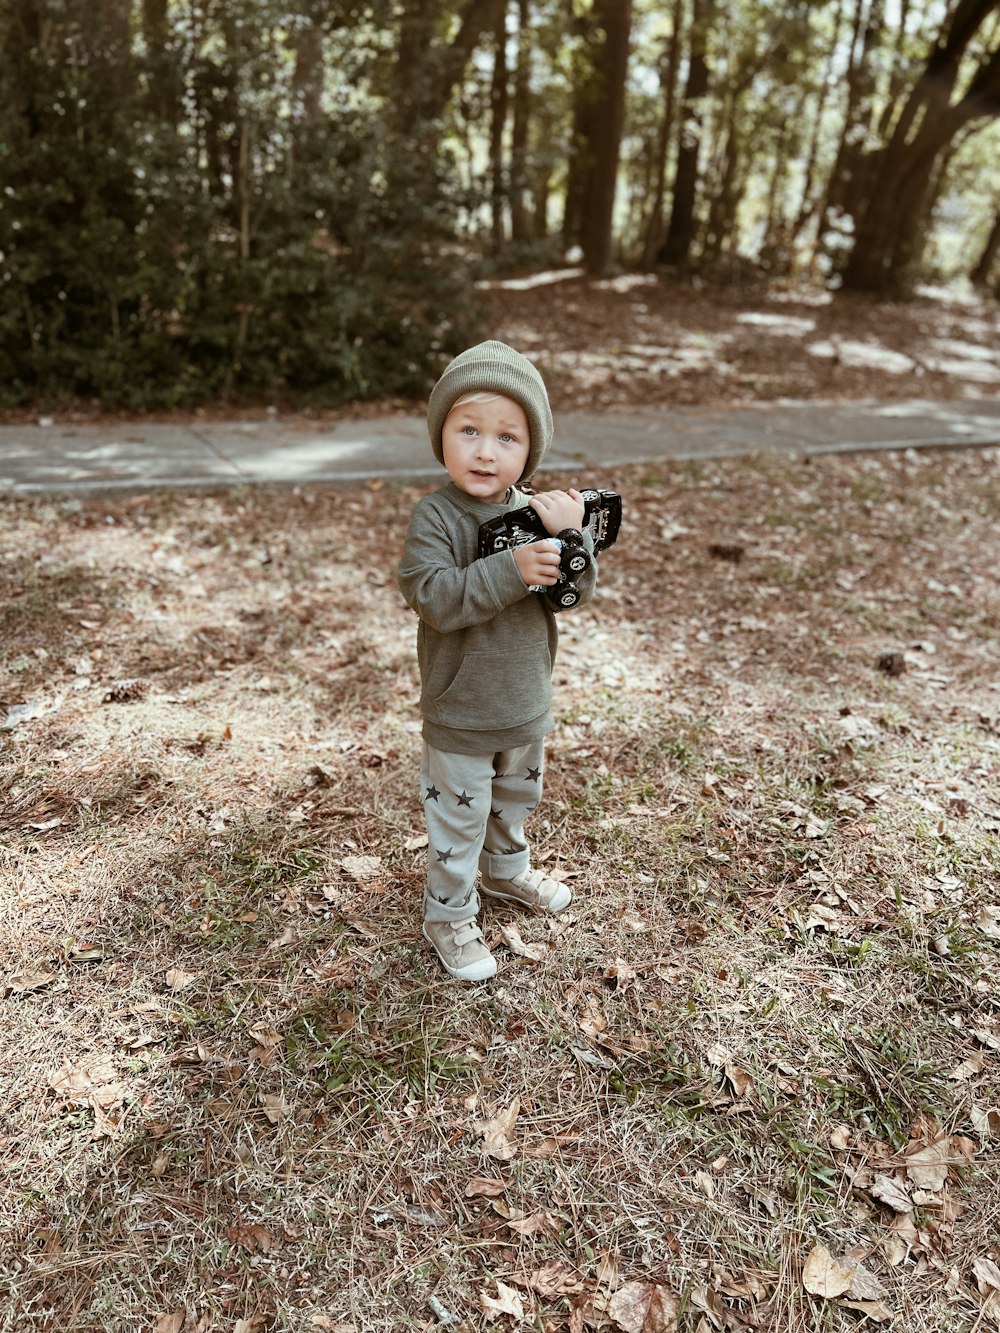 a young boy holding a camera in a wooded area